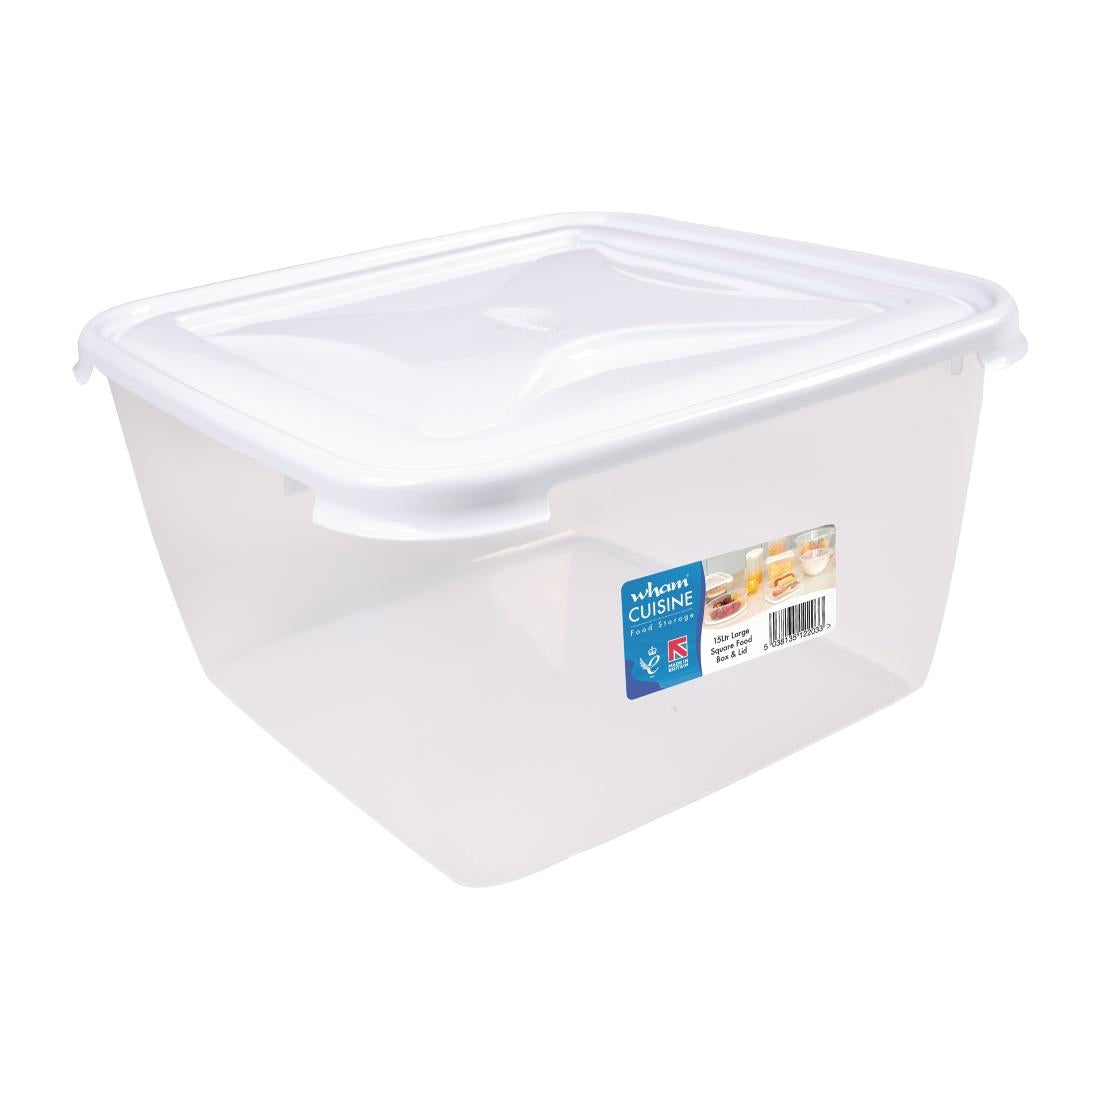 FS458 Wham Cuisine Large Square Food Storage Box Container 15ltr JD Catering Equipment Solutions Ltd